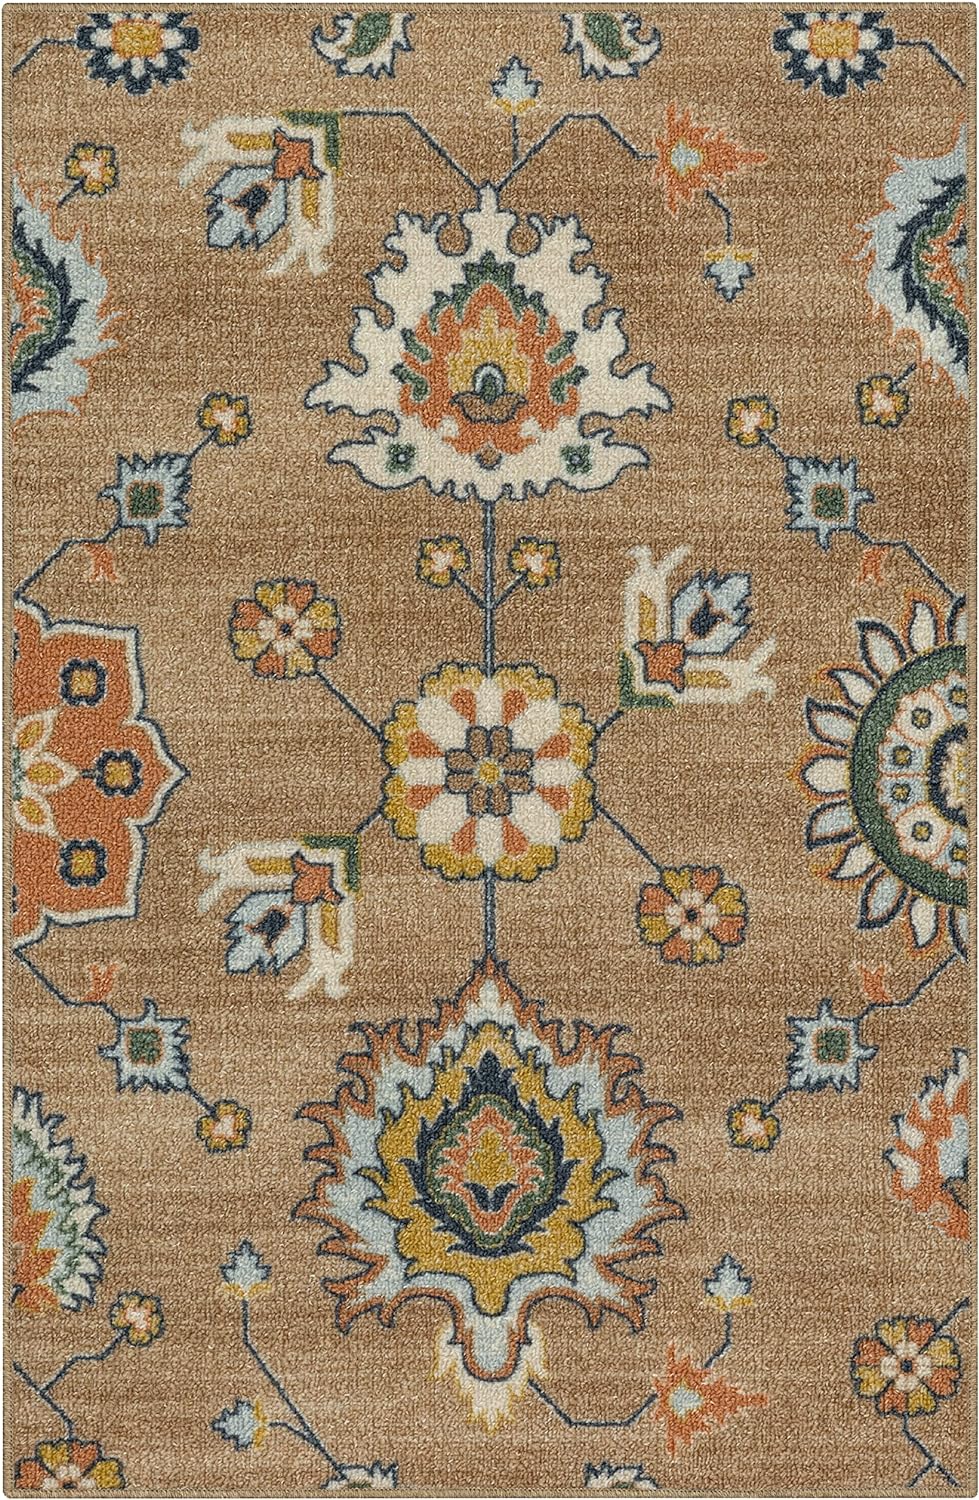 Maples Rugs Fleur Contemporary Motif Kitchen Rugs Non Skid Accent Area Carpet [Made in USA], Neutral/Multi, 2'6 x 3'10